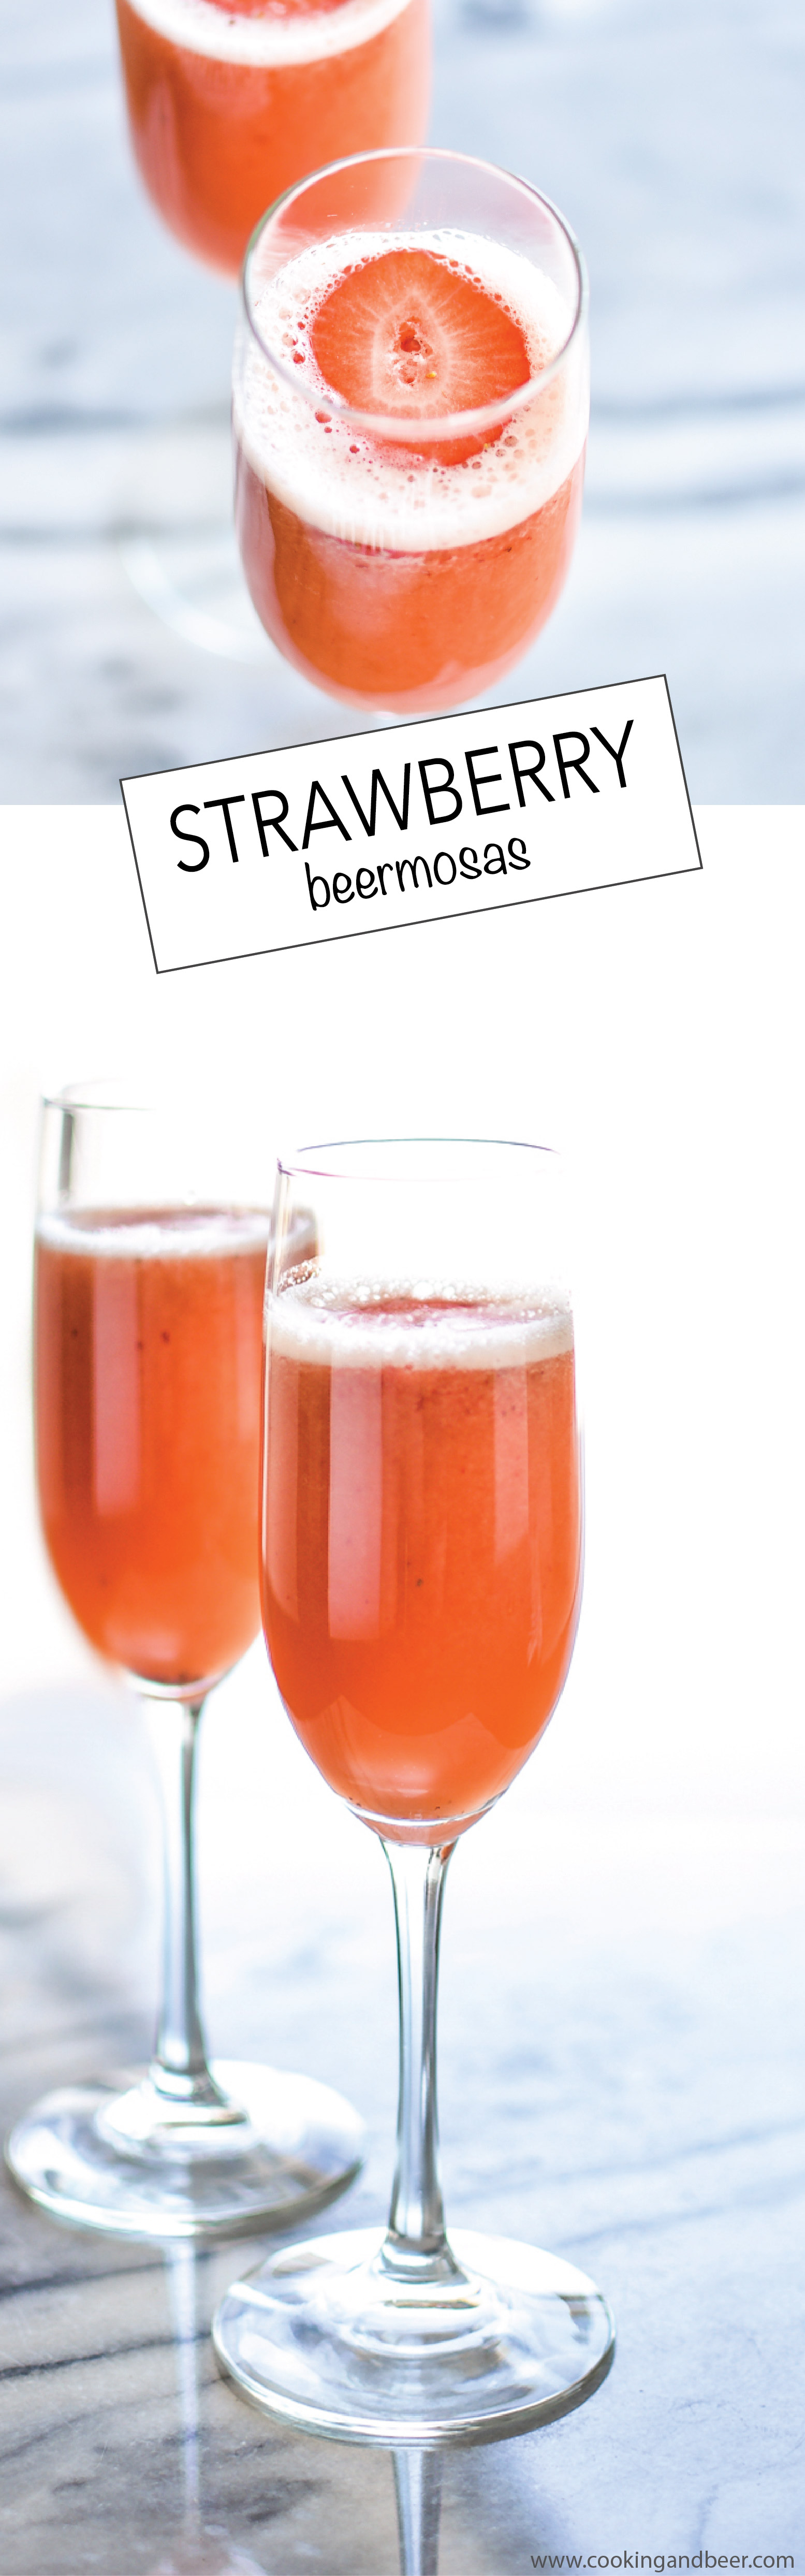 Strawberry Beermosas, combining beer, oj and strawberry puree, are a fun and exciting way to incorporate into your Easter brunch! | www.cookingandbeer.com